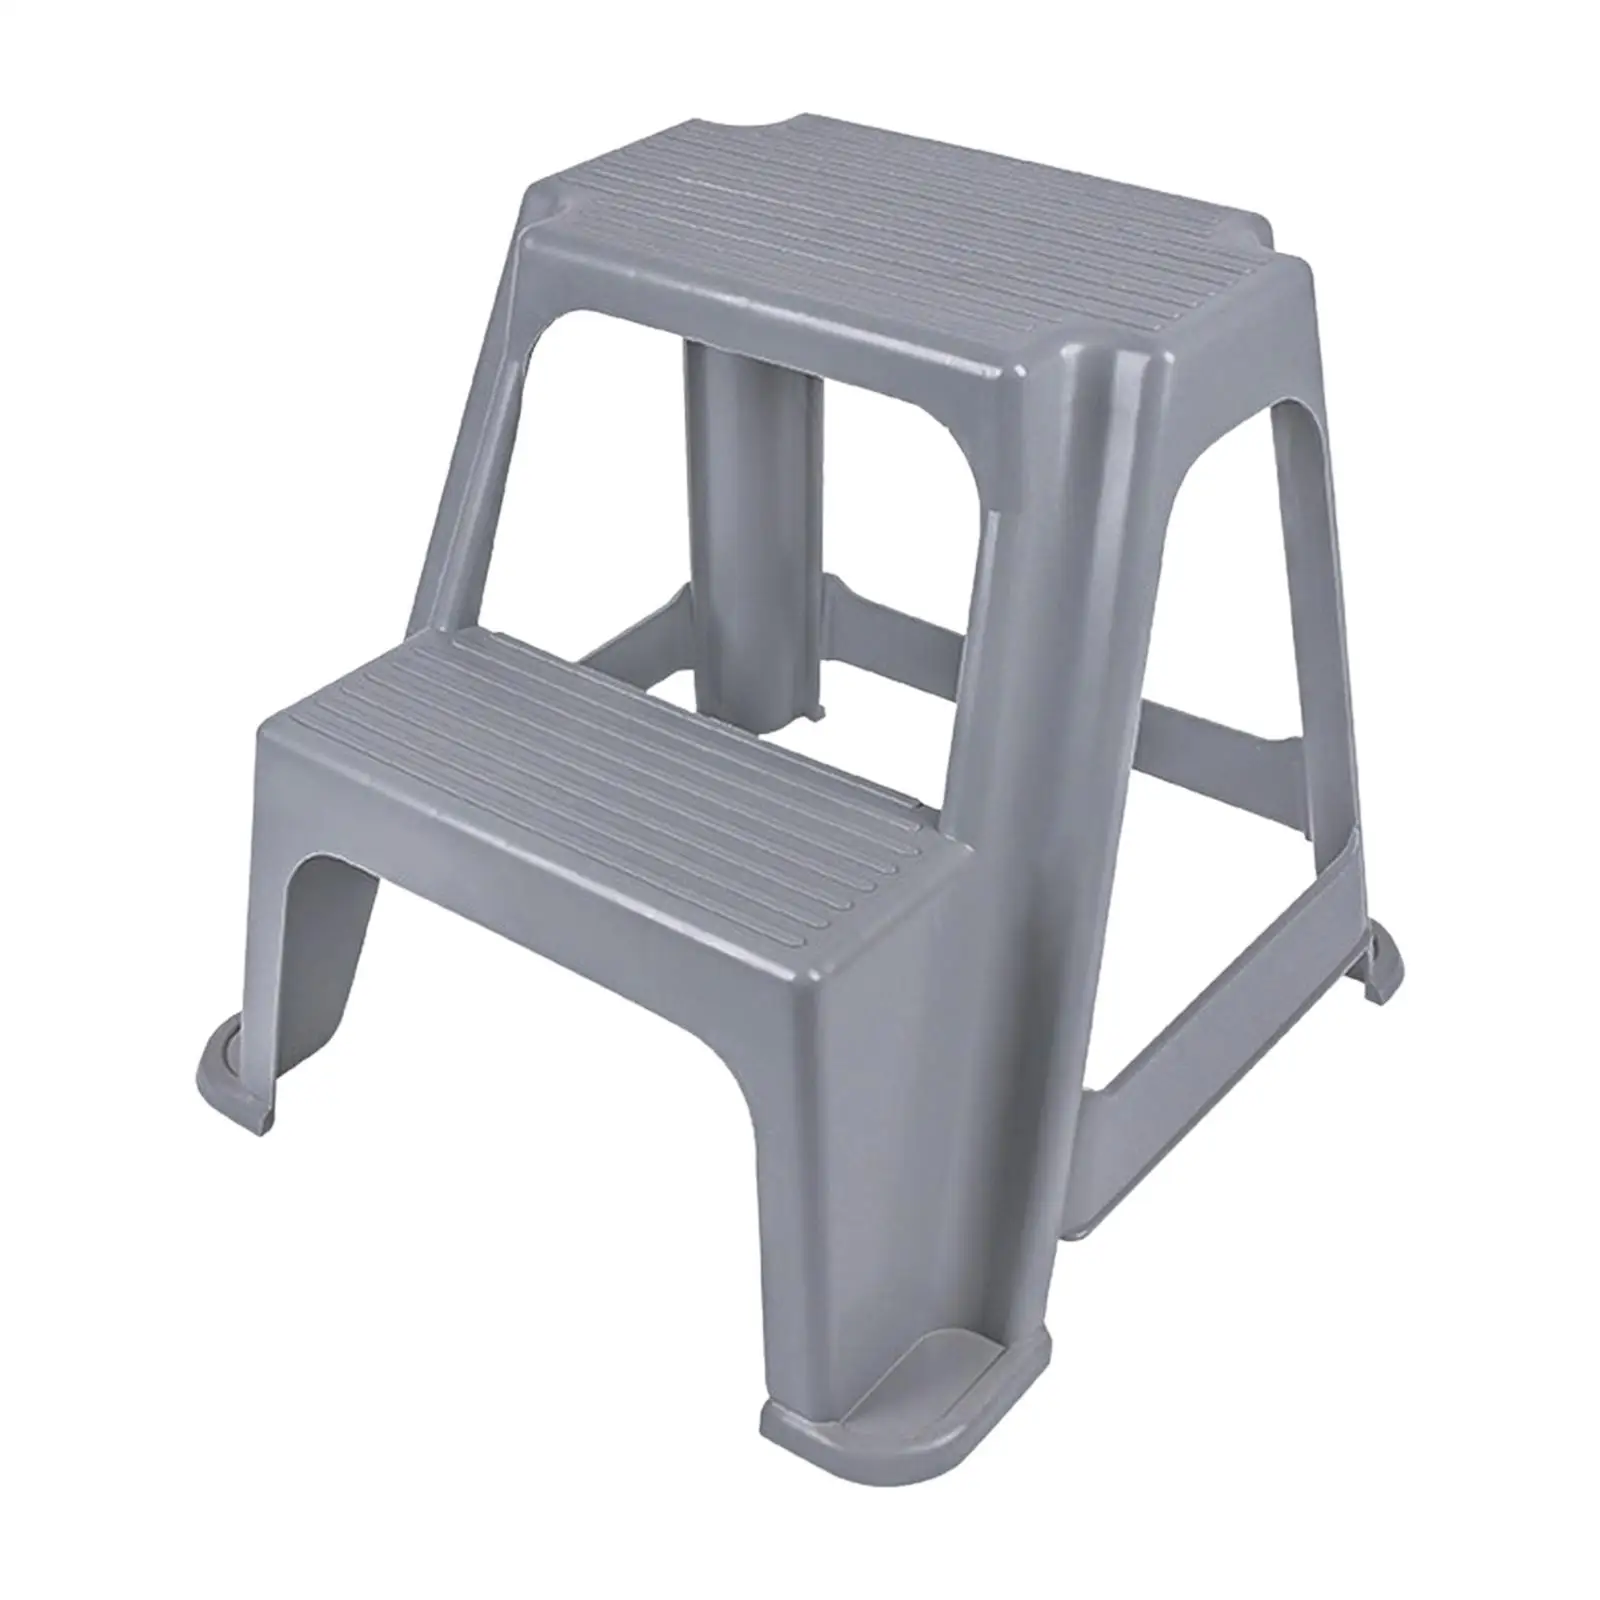 2 Step Stool Dual Height Stepping Stool Stepstool for Kids Elderly Toddlers